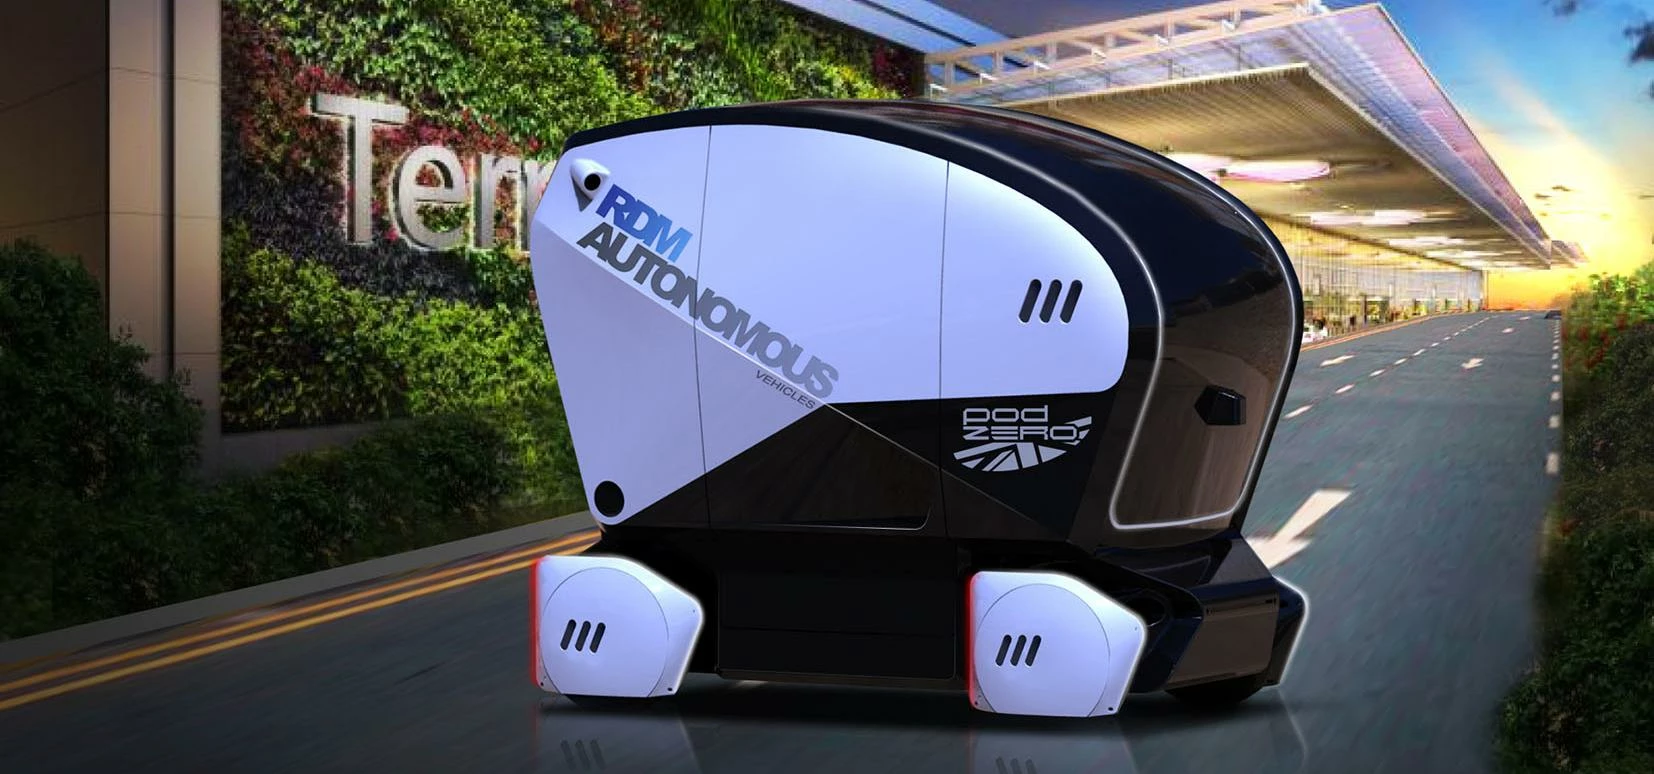 The next generation driverless vehicle pod launched by RDM Group 